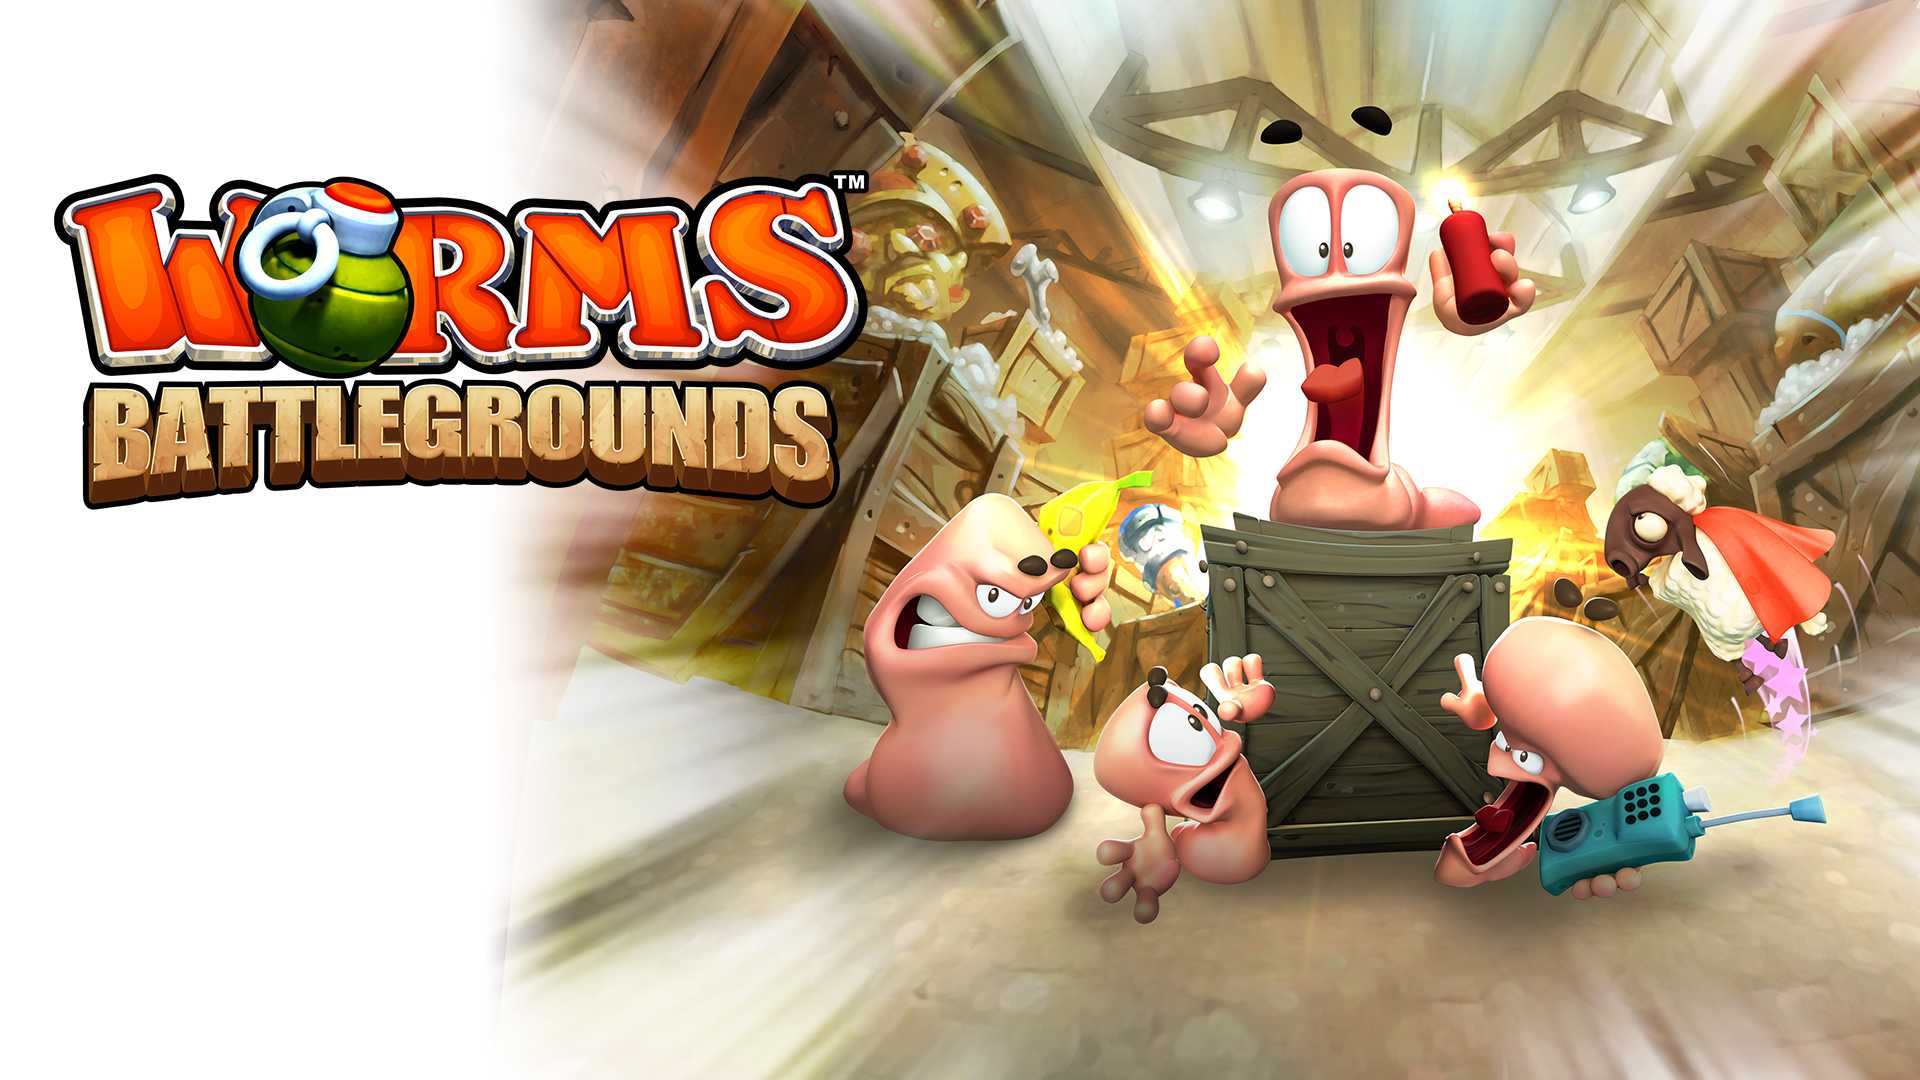 Worms gameplay. Worms Battlegrounds. Вормс геймплей. Worms Rumble геймплей. Holy Bomb worms.